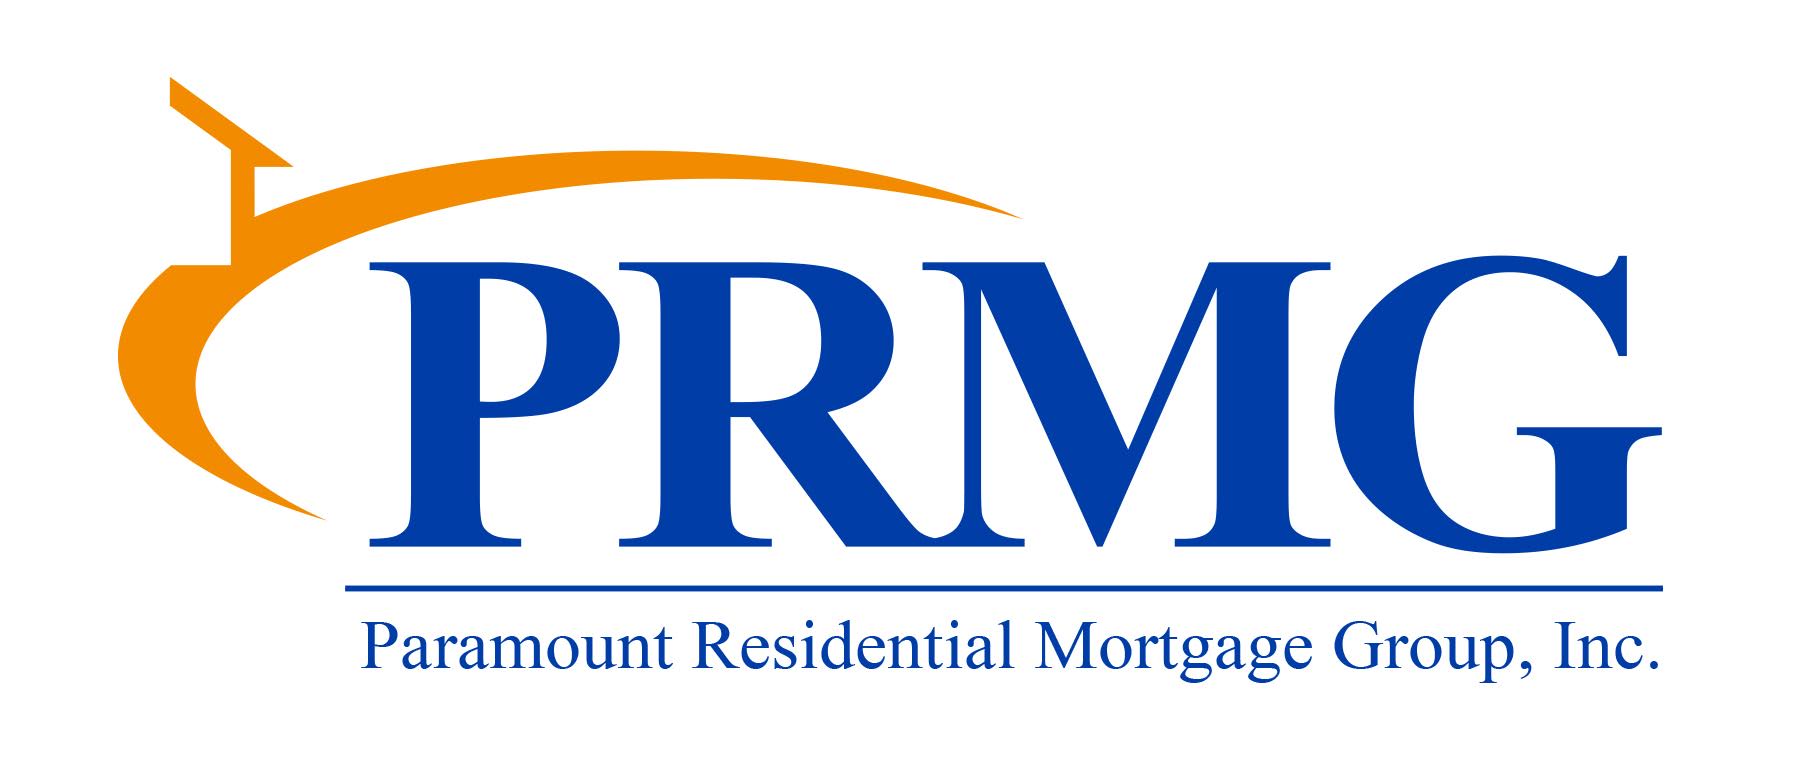 Paramount Residential Mortgage Group Inc. (PRMG) has announced the launch of its PRMG Plus Down Payment Protection program